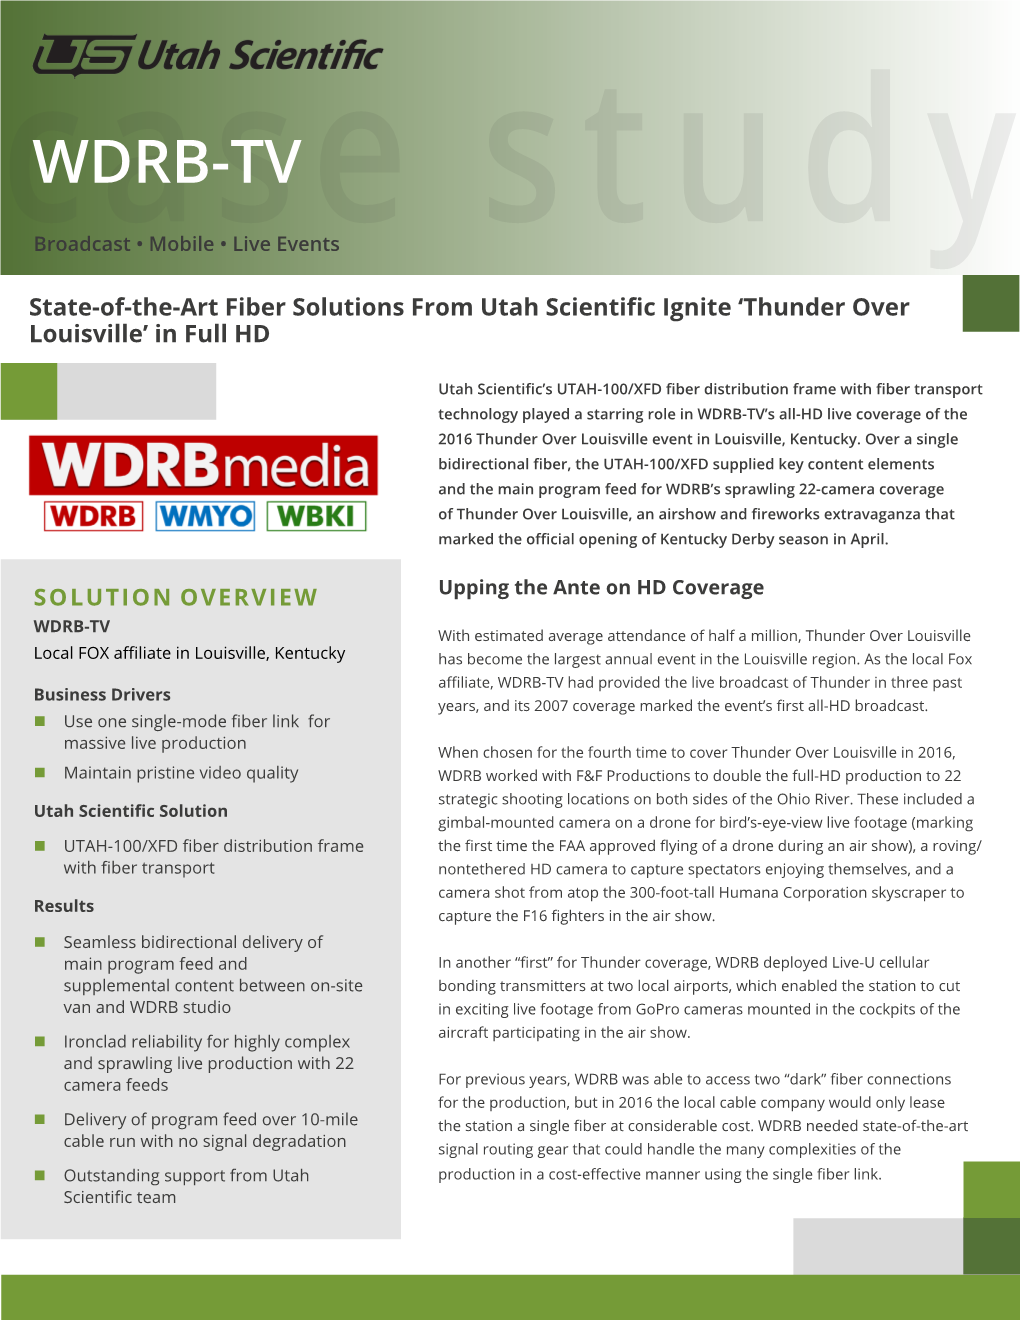 WDRB-TV Casebroadcast • Mobile • Live Events Study State-Of-The-Art Fiber Solutions from Utah Scientific Ignite ‘Thunder Over Louisville’ in Full HD